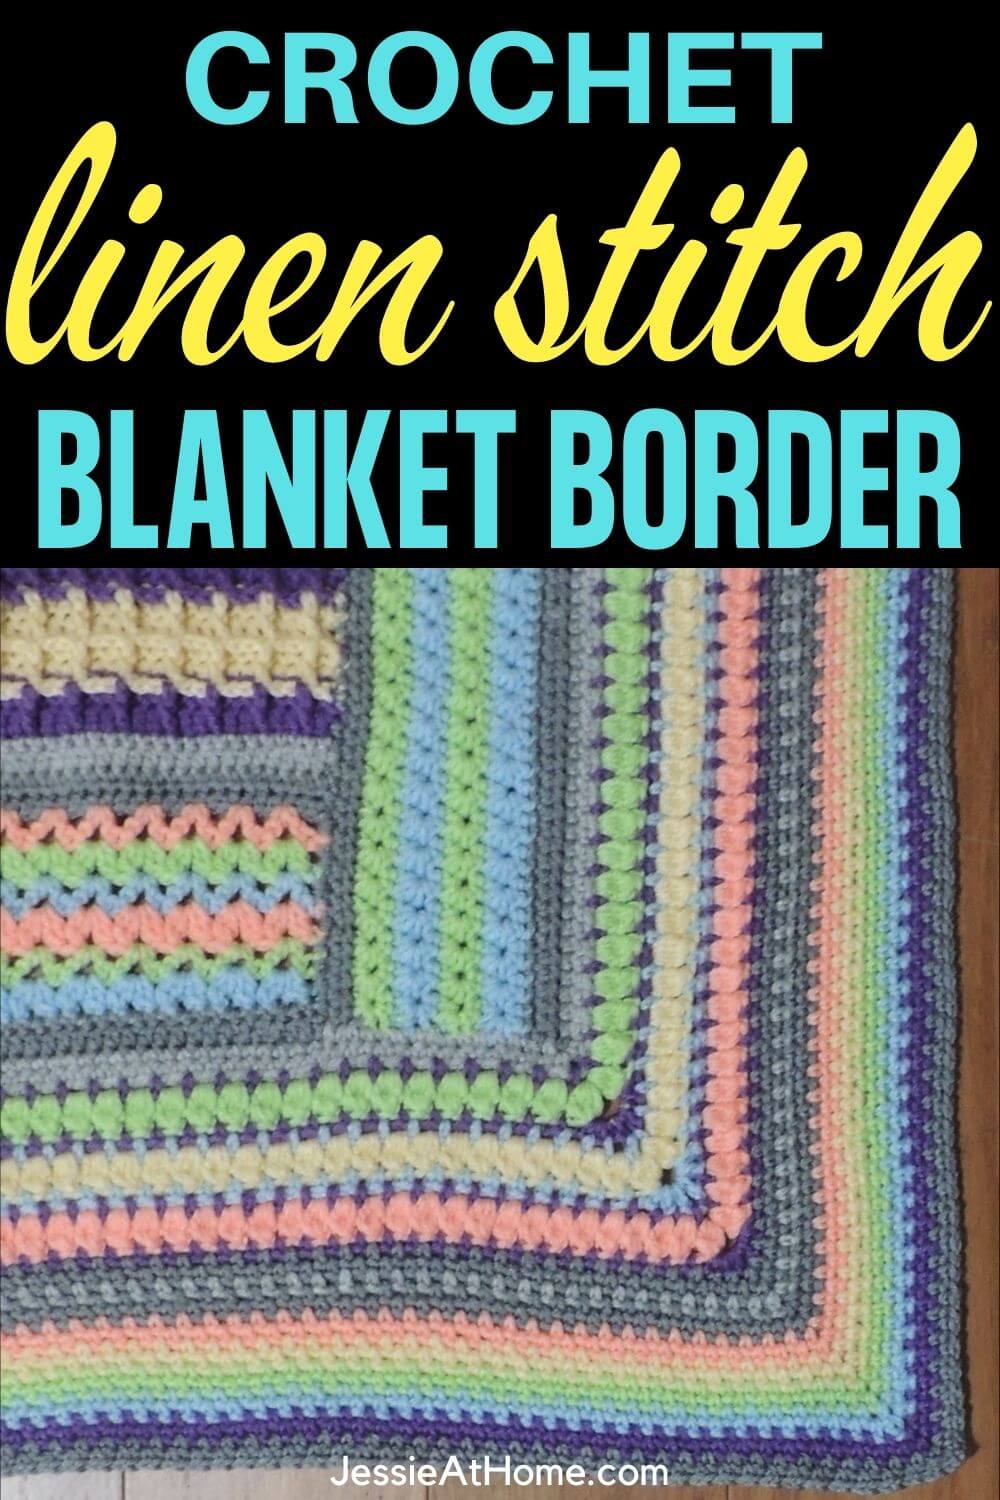 How To Finish a Crochet Blanket – Suzie’s Striped Sampler Is Done